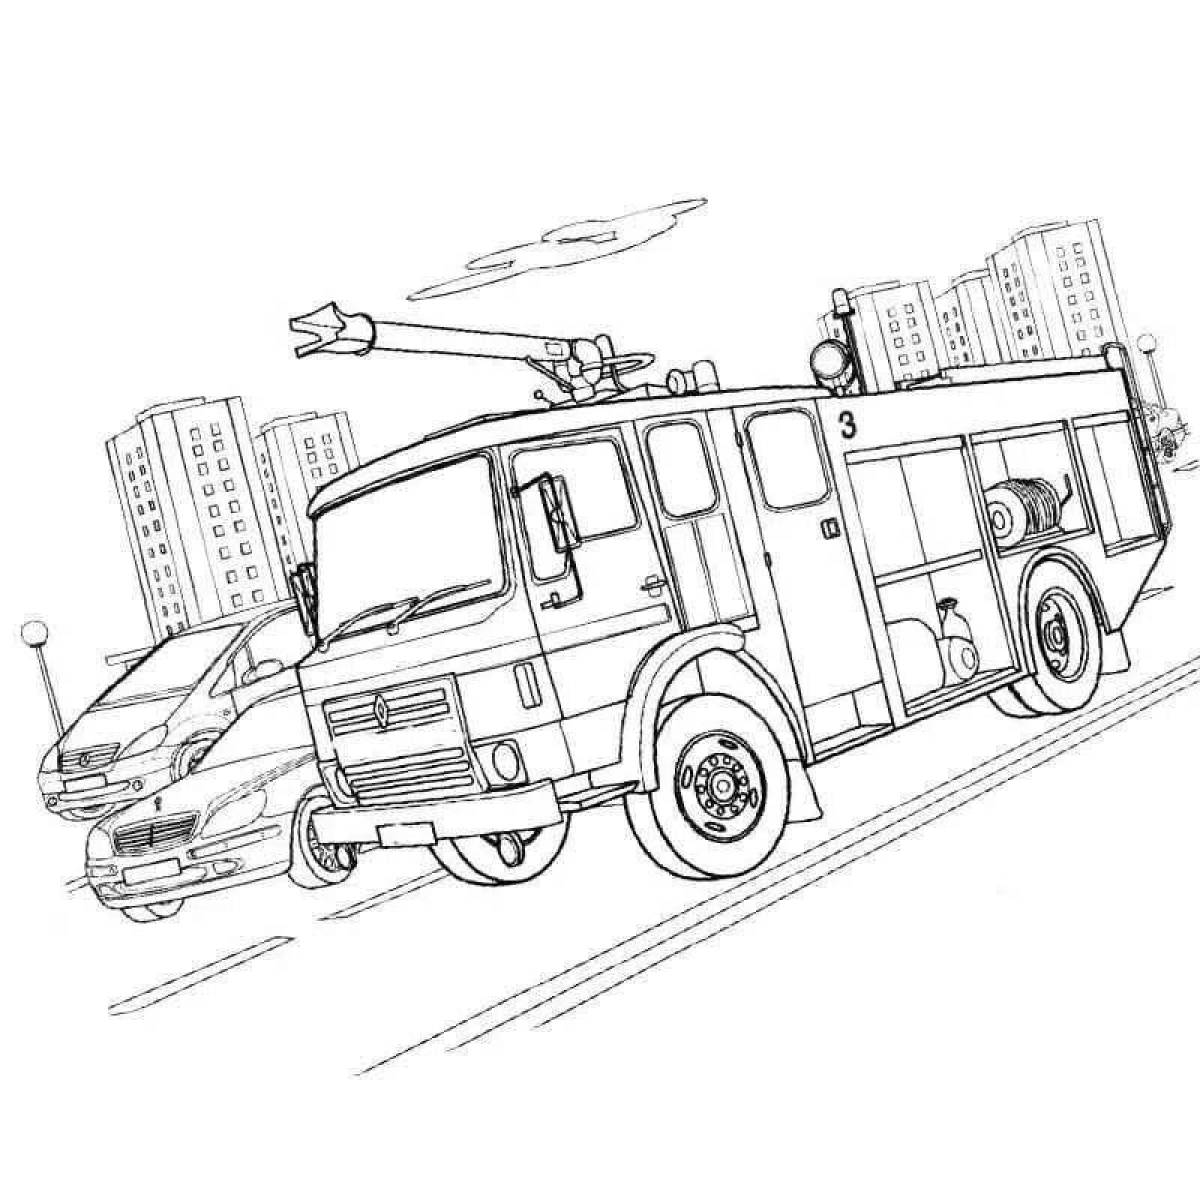 Detailed coloring page of the cash-in-transit vehicle